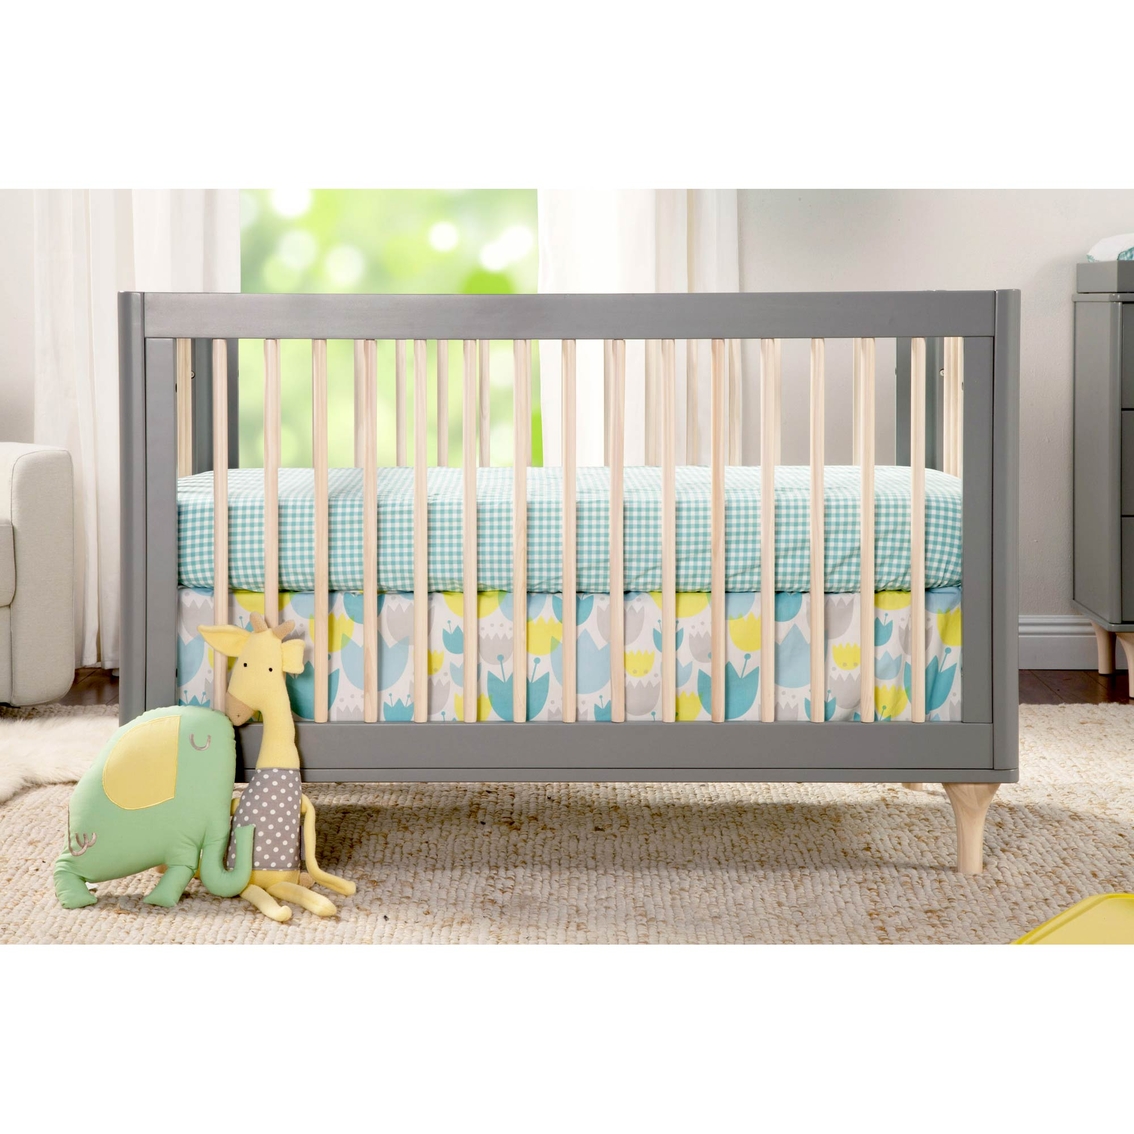 Babyletto Lolly 3 in 1 Convertible Crib - Image 4 of 4